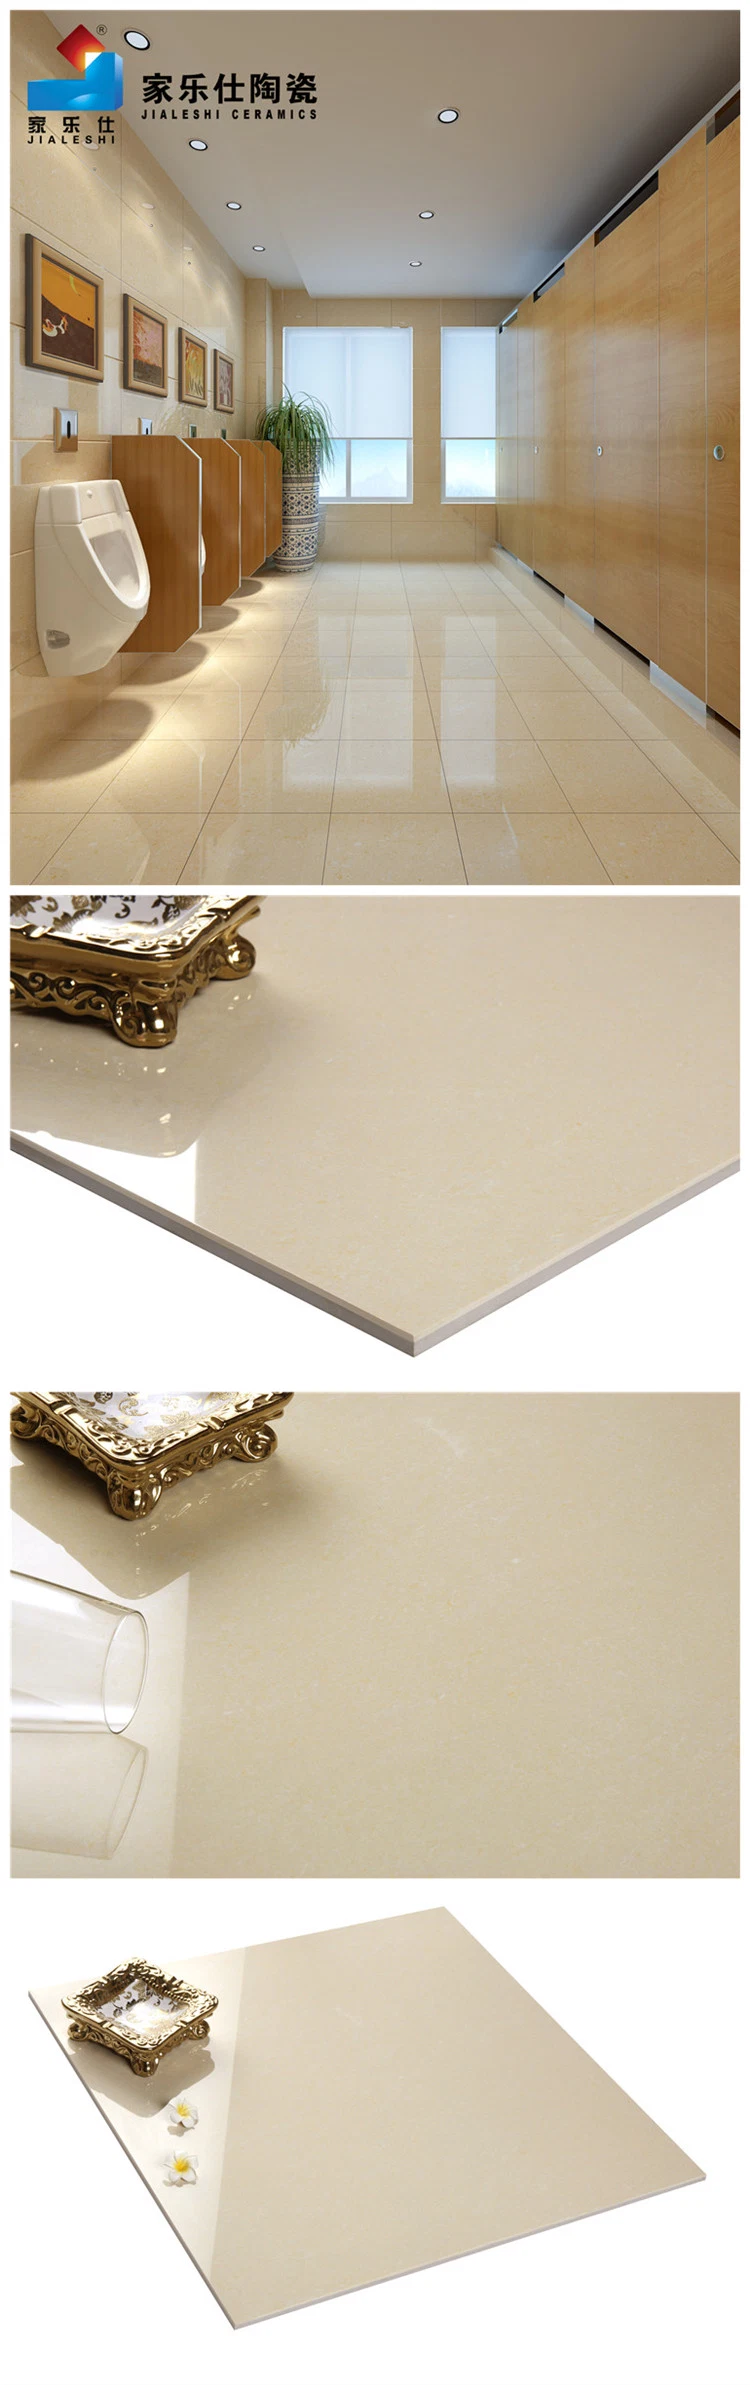 Polycrysta Double Loading Suitable for Engineering Project 600X600 800X800 Polished Porcelain Tile Beige Colour